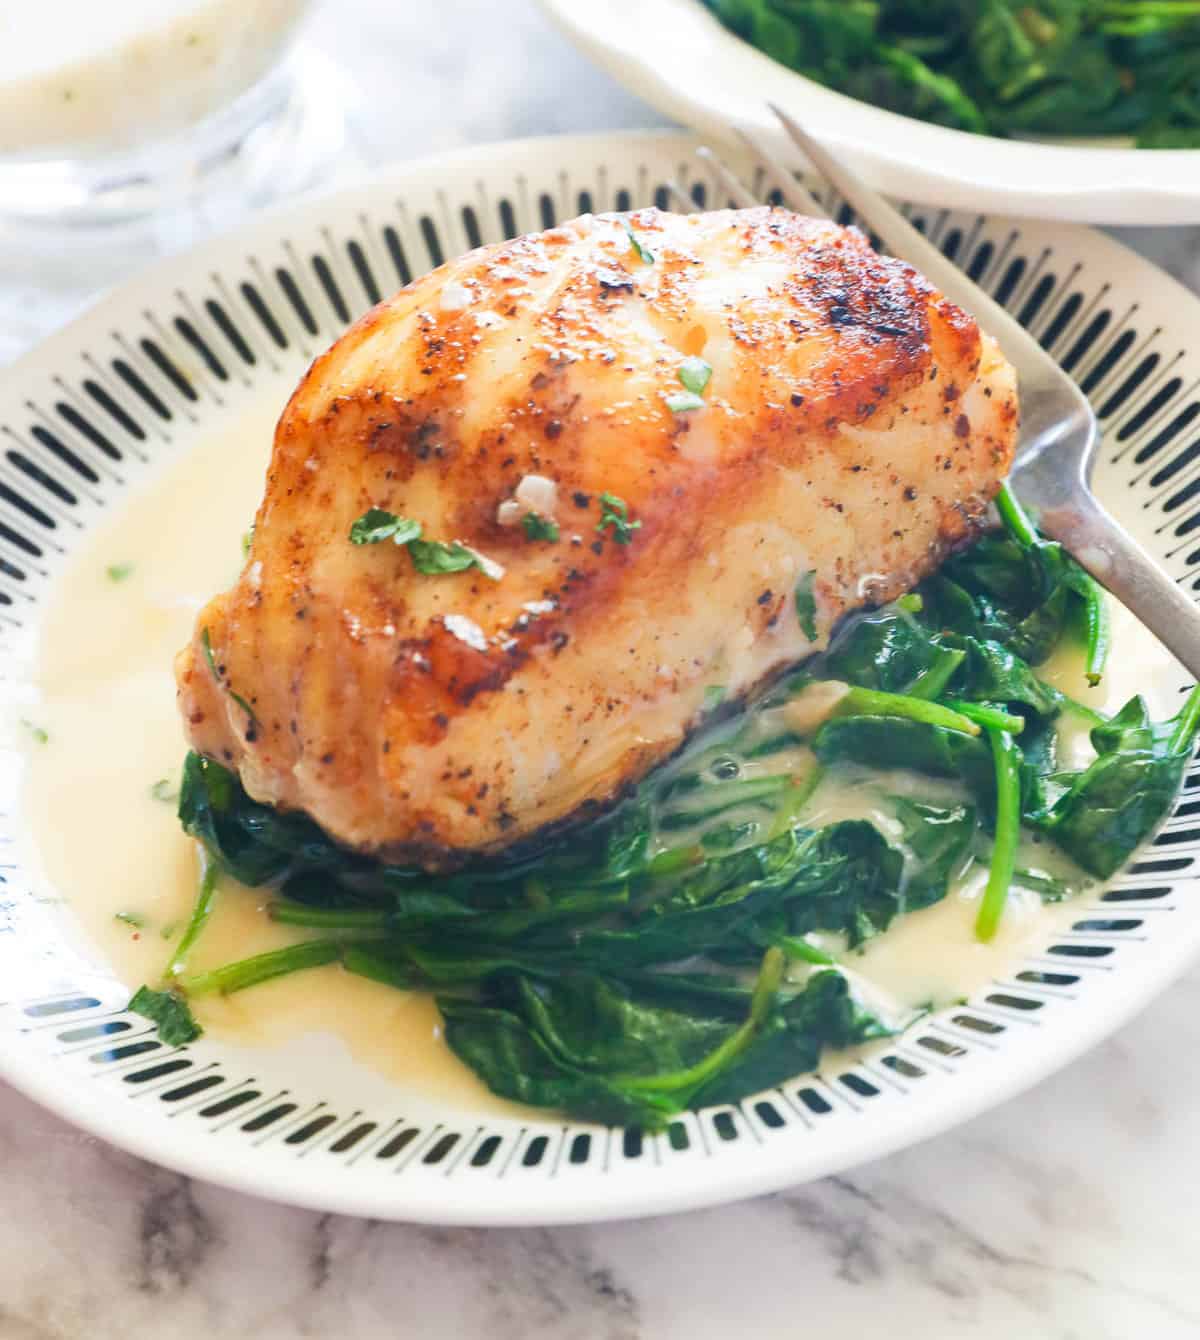 Delicious Chilean Sea Bass served on a bed of spinach and smothered in beurre blanc